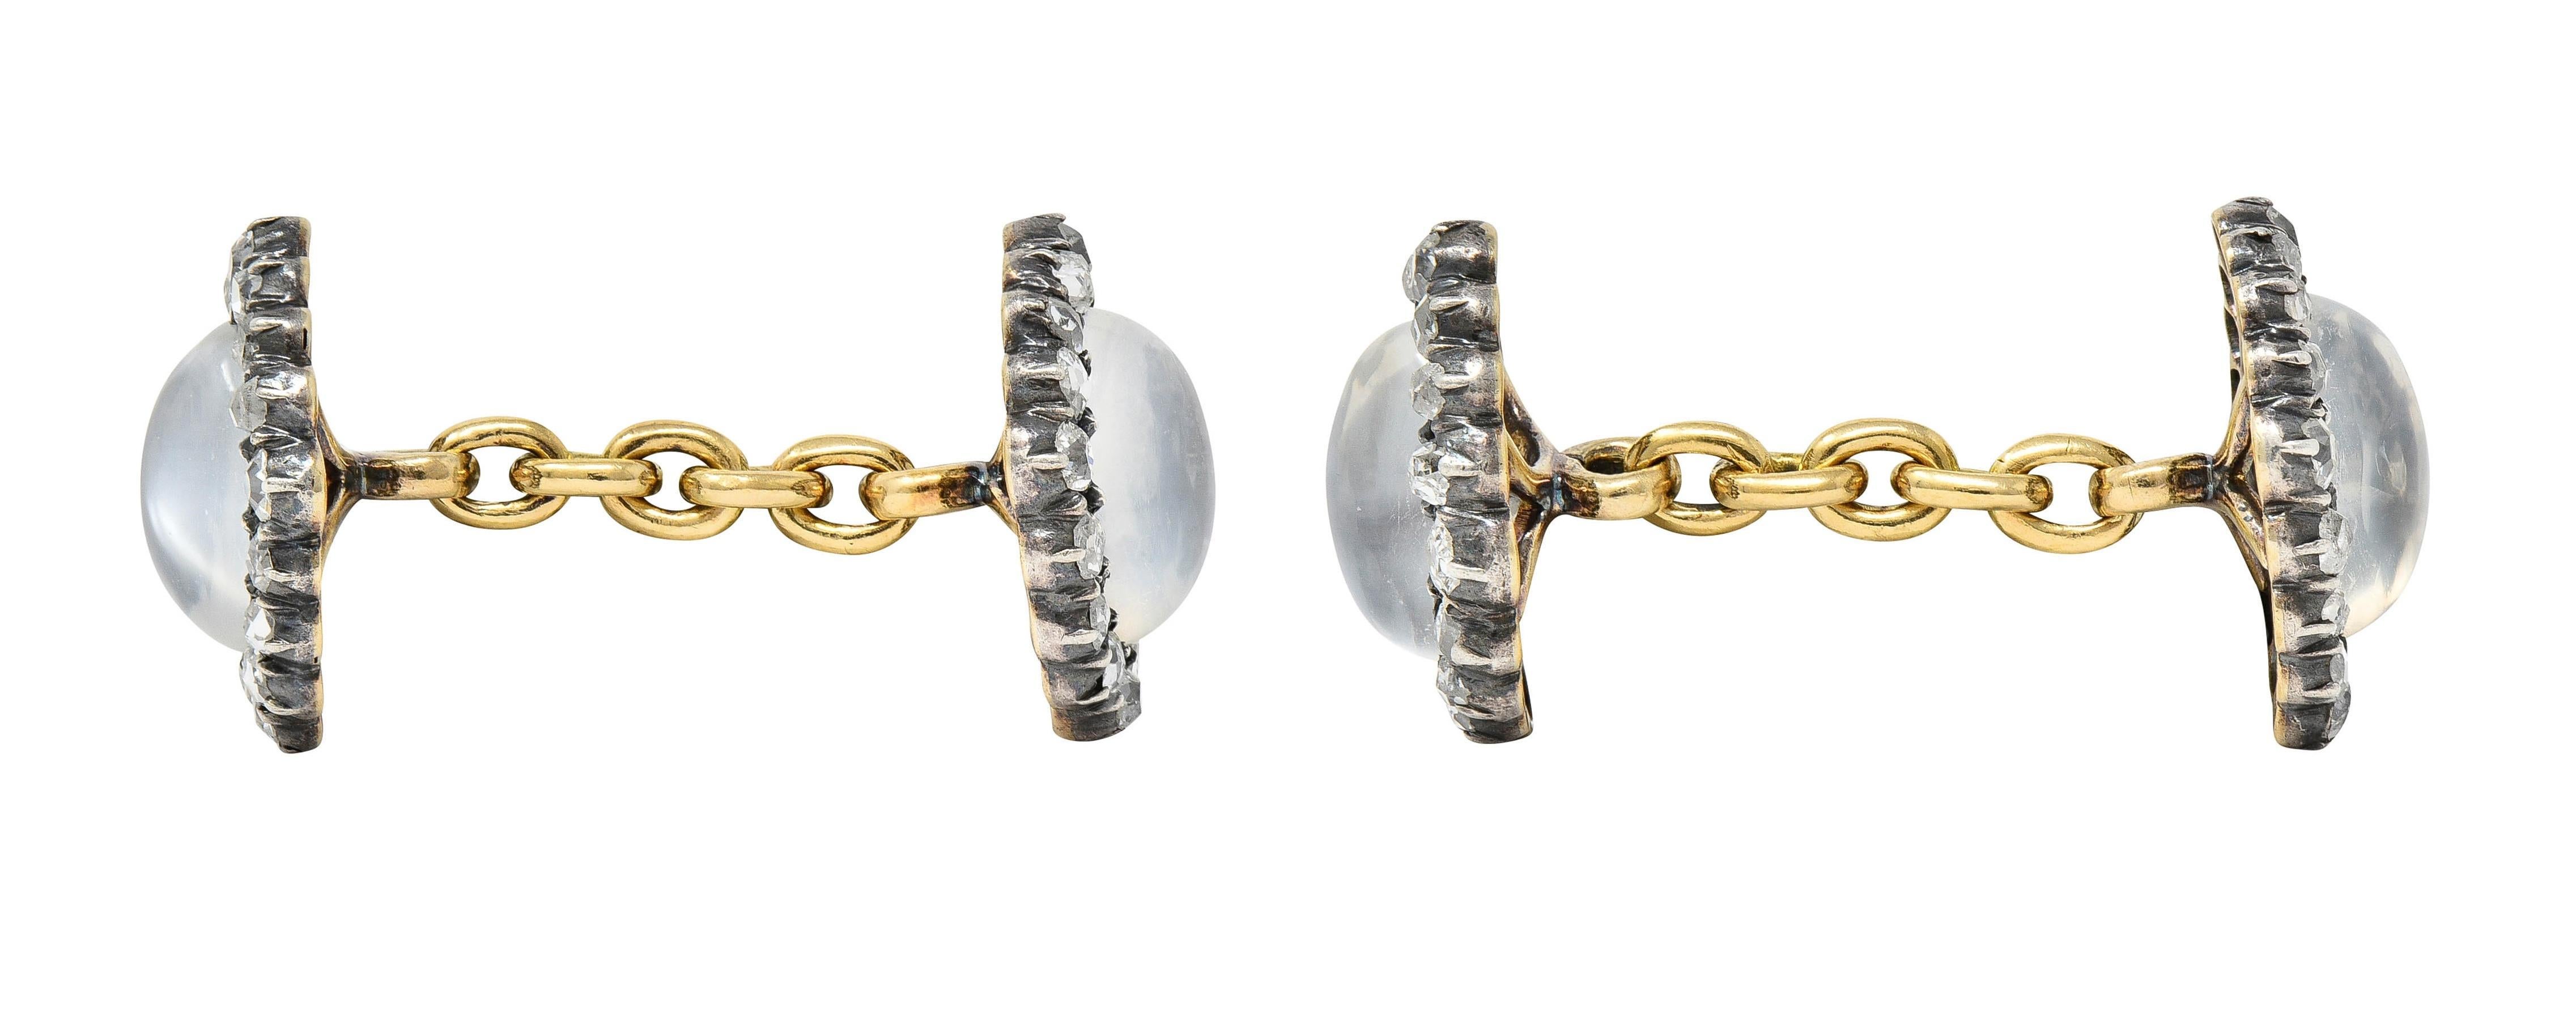 Designed as link-style cufflinks terminating with silver-topped navette-shaped forms 
Centering oval-shaped moonstone cabochons measuring 6.5 x 8.5 mm 
Translucent colorless body with white adularescence - bead set
With a halo surround of rose and